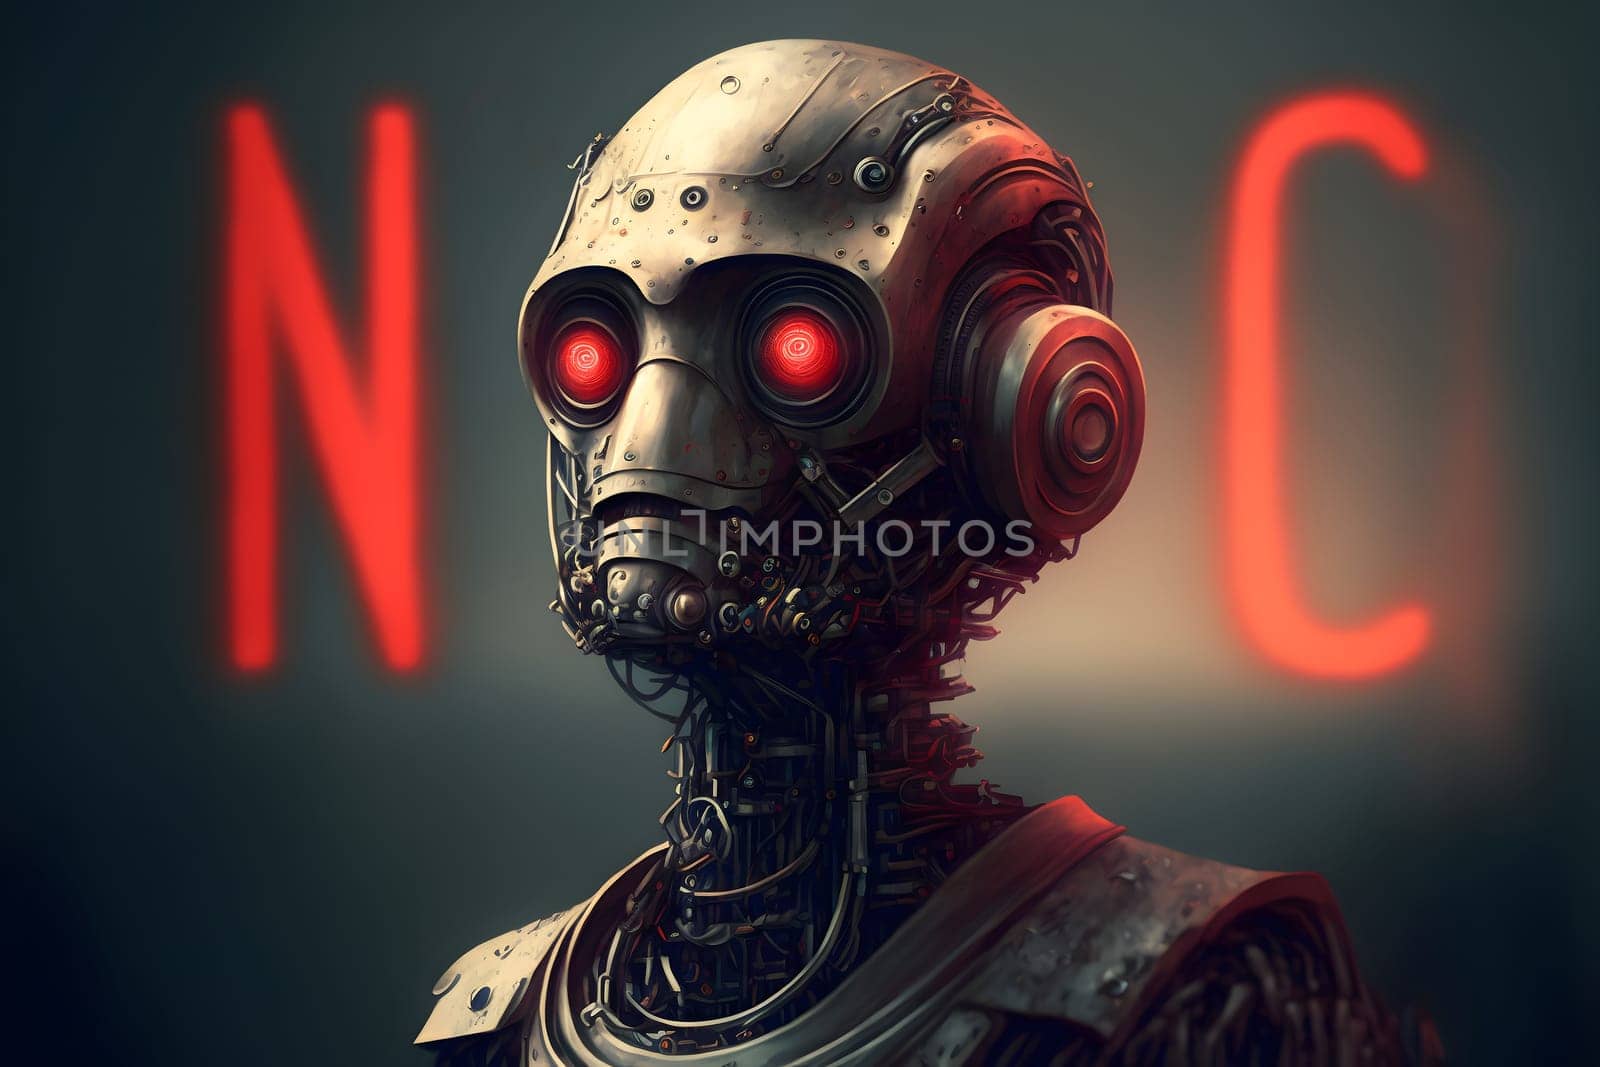 portrait of robot with eyes glowing red and letters N and C in the background, neural network generated art. Digitally generated image. Not based on any actual person, scene or pattern.